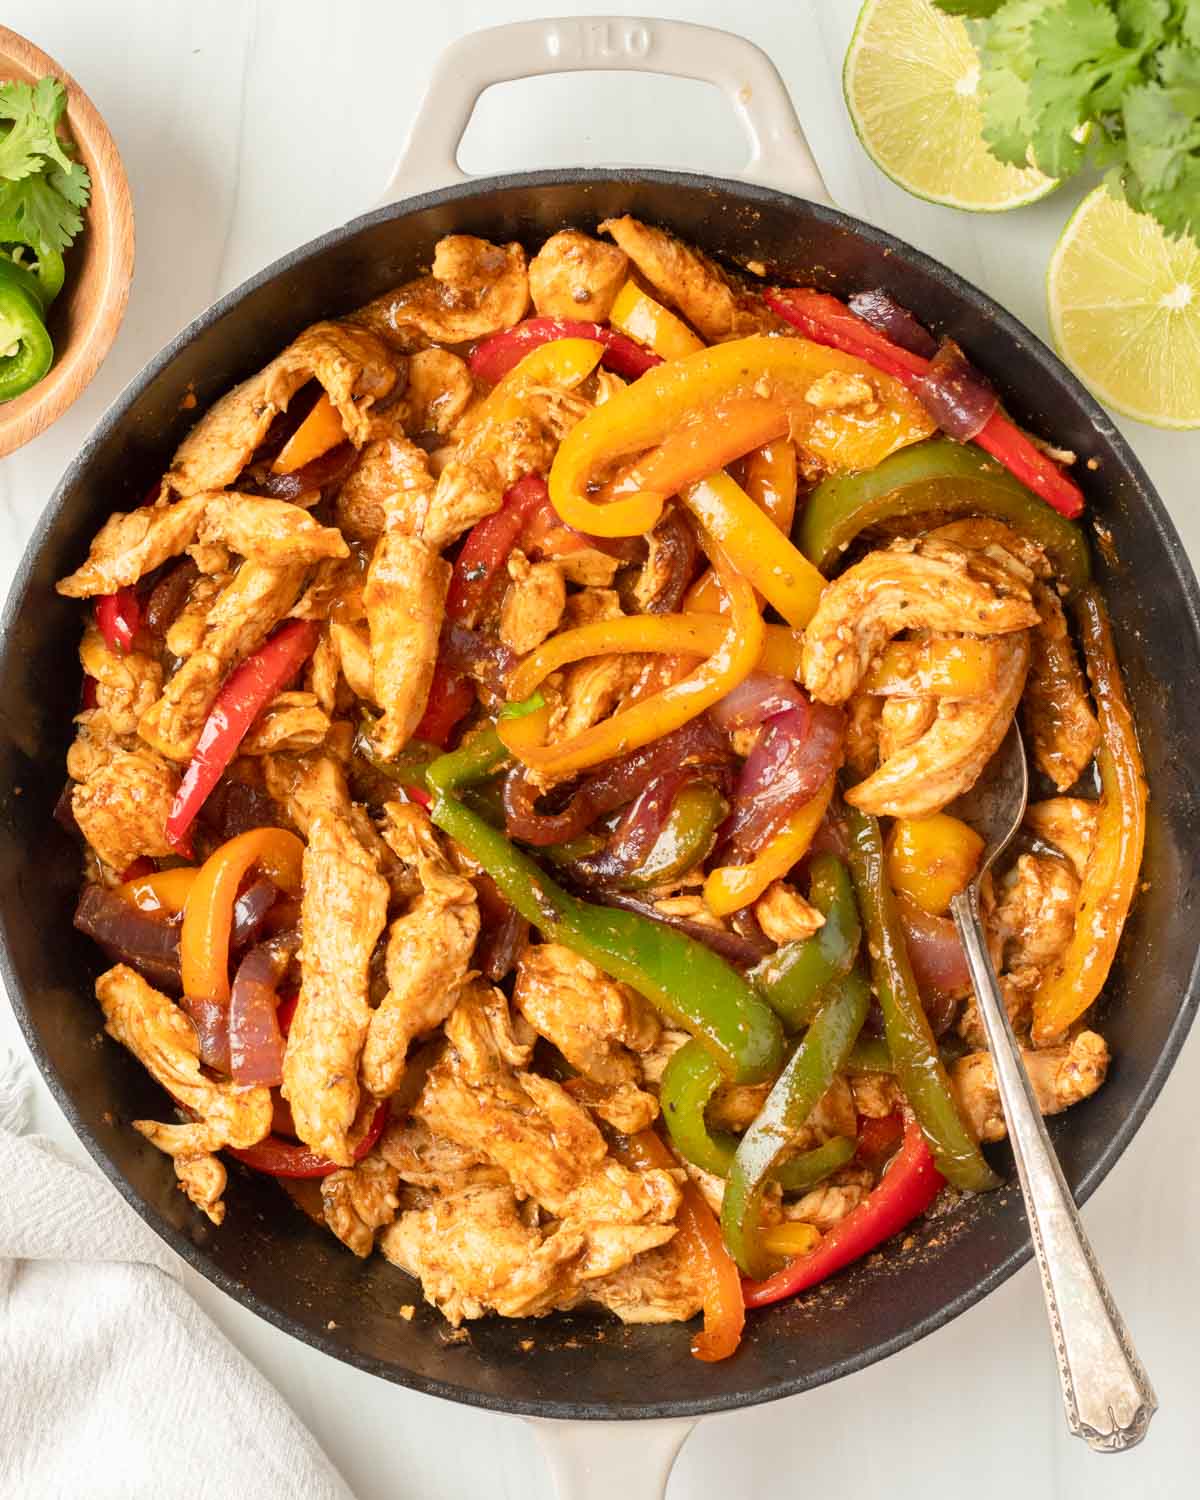 These chicken fajitas are a one-pan dinner made with chicken and vegetables cooked in a homemade fajita sauce and served in a tortilla and your favorite fajita toppings.